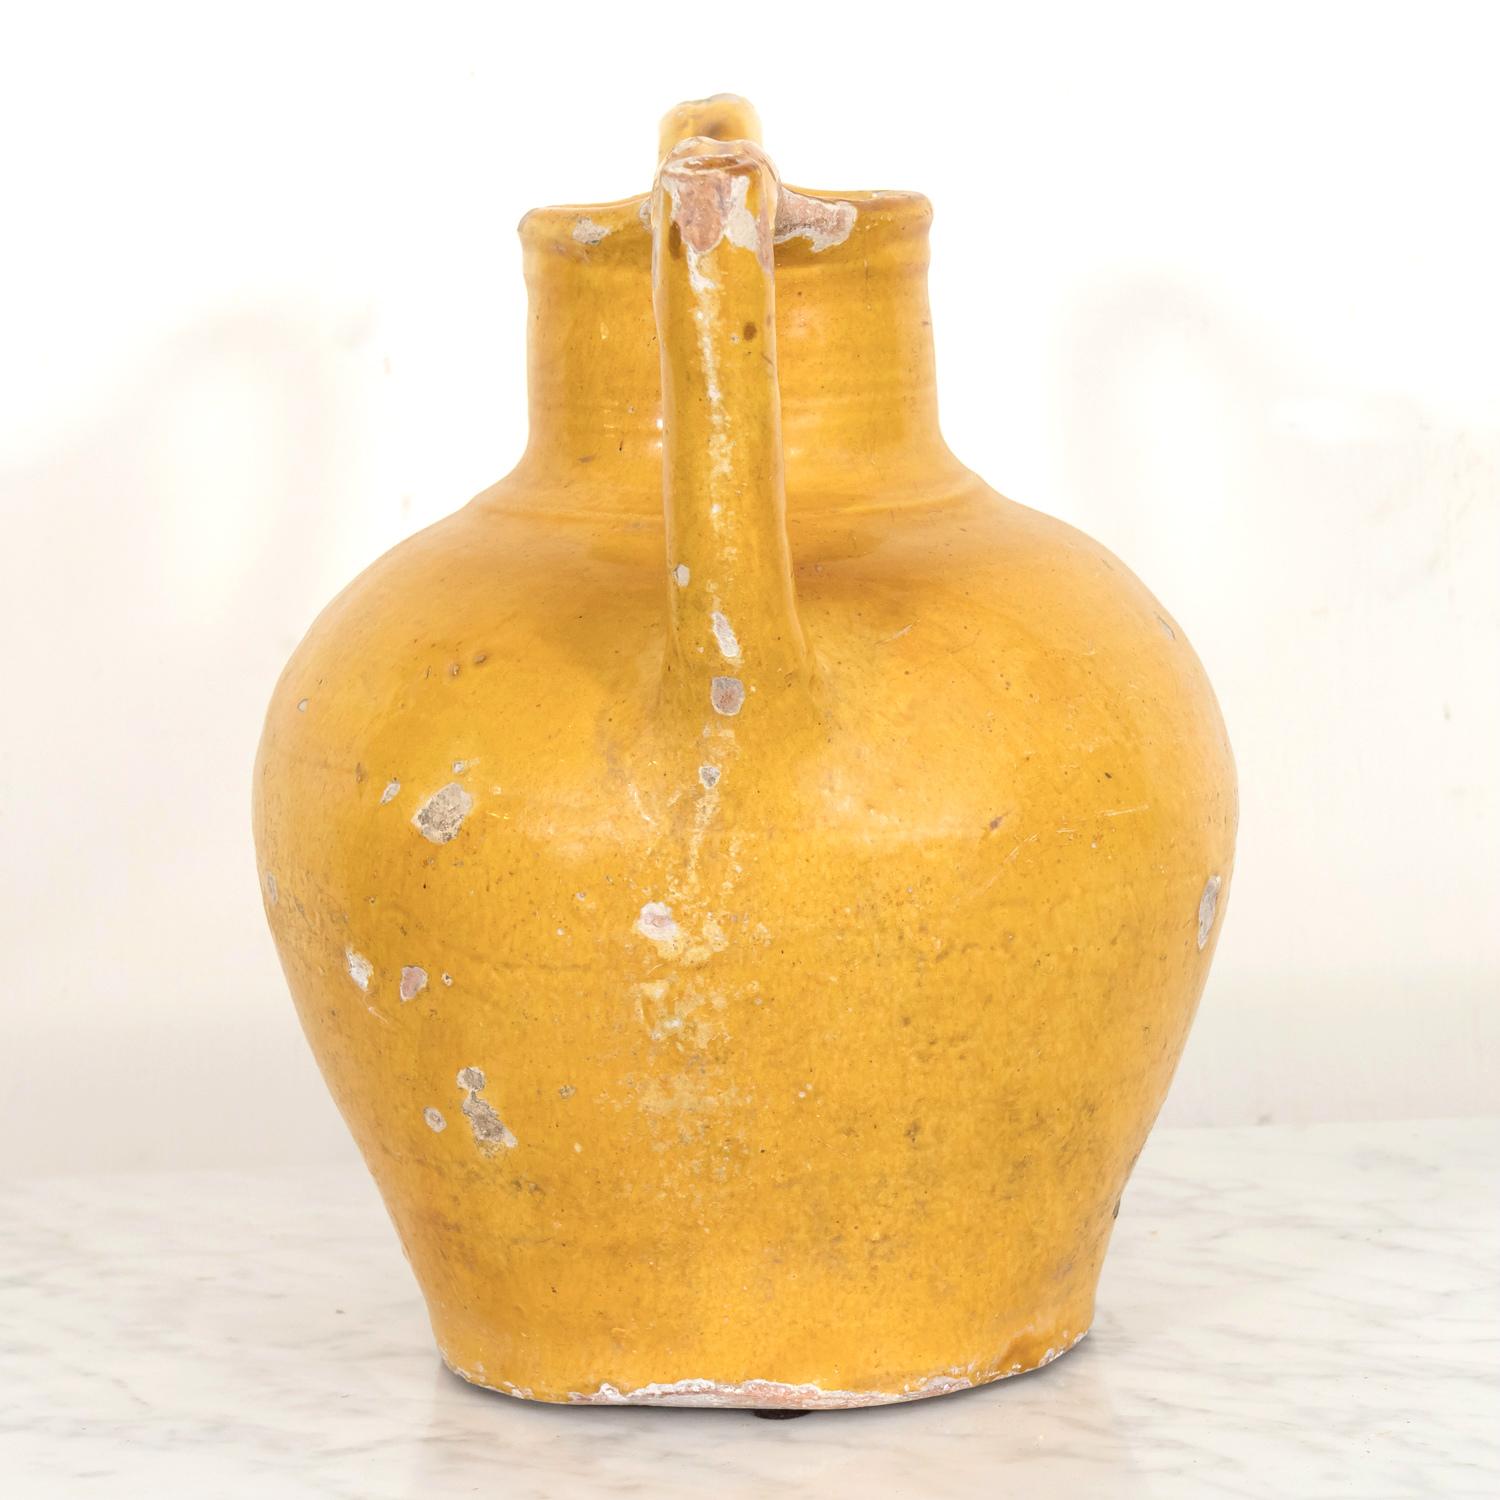 Late 19th Century 19th Century Antique French Cruche Orjol or Water Jug with Mustard Yellow Glaze For Sale